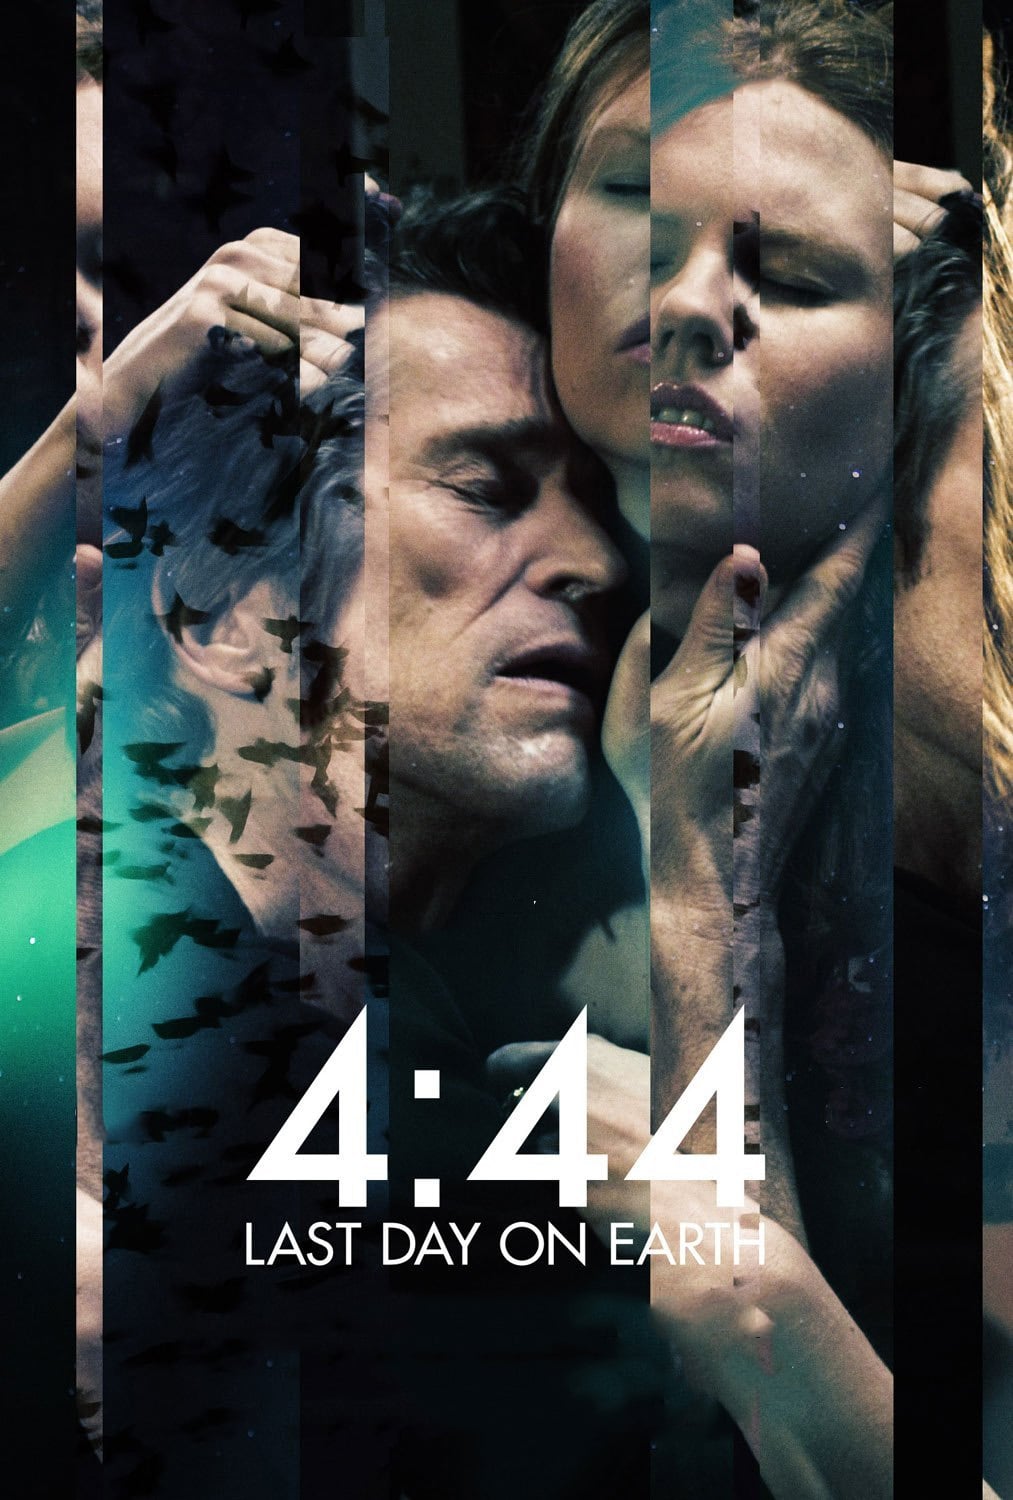 4:44 Last Day on Earth (2011)